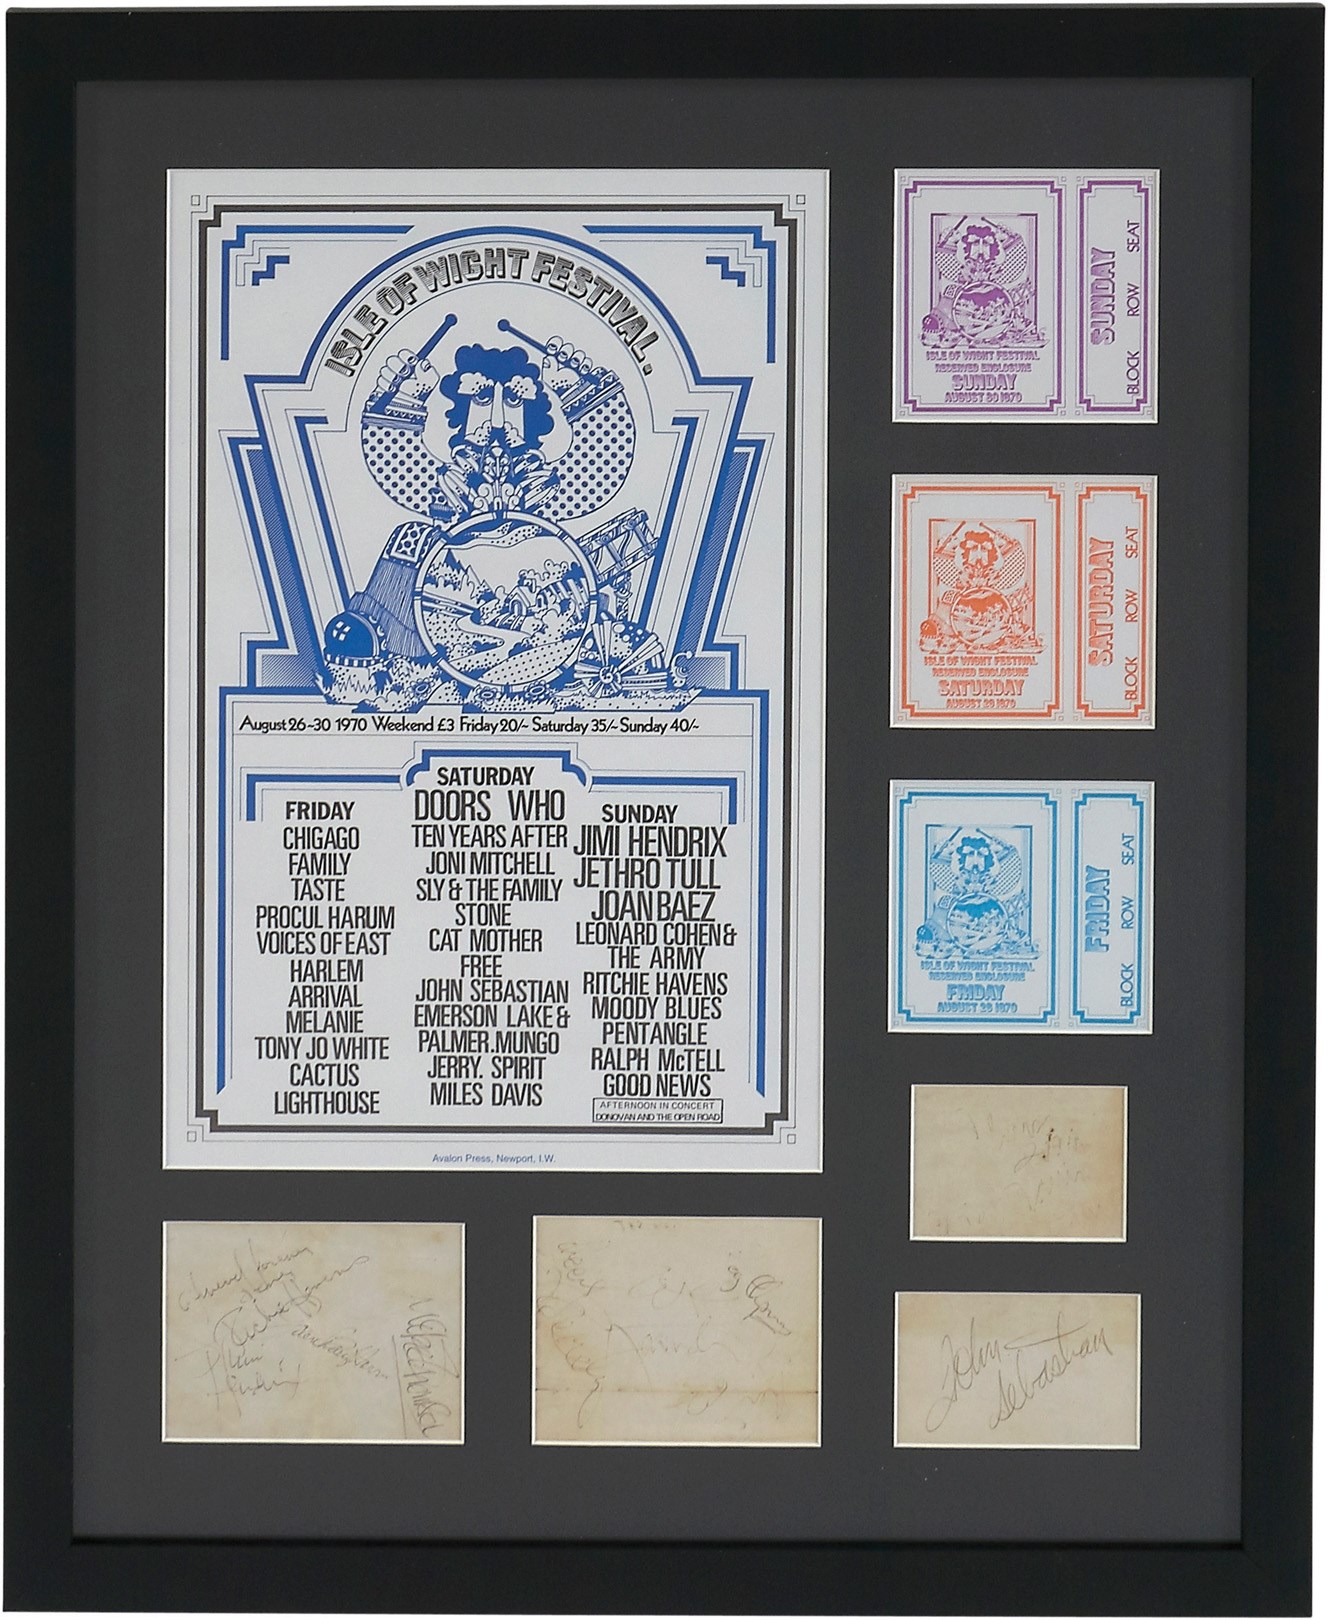 Rock 'N' Roll - 1970 Isle of Wight Autograph Sheets w/Jimi Hendrix Joined by The Who (Direct Provenance)